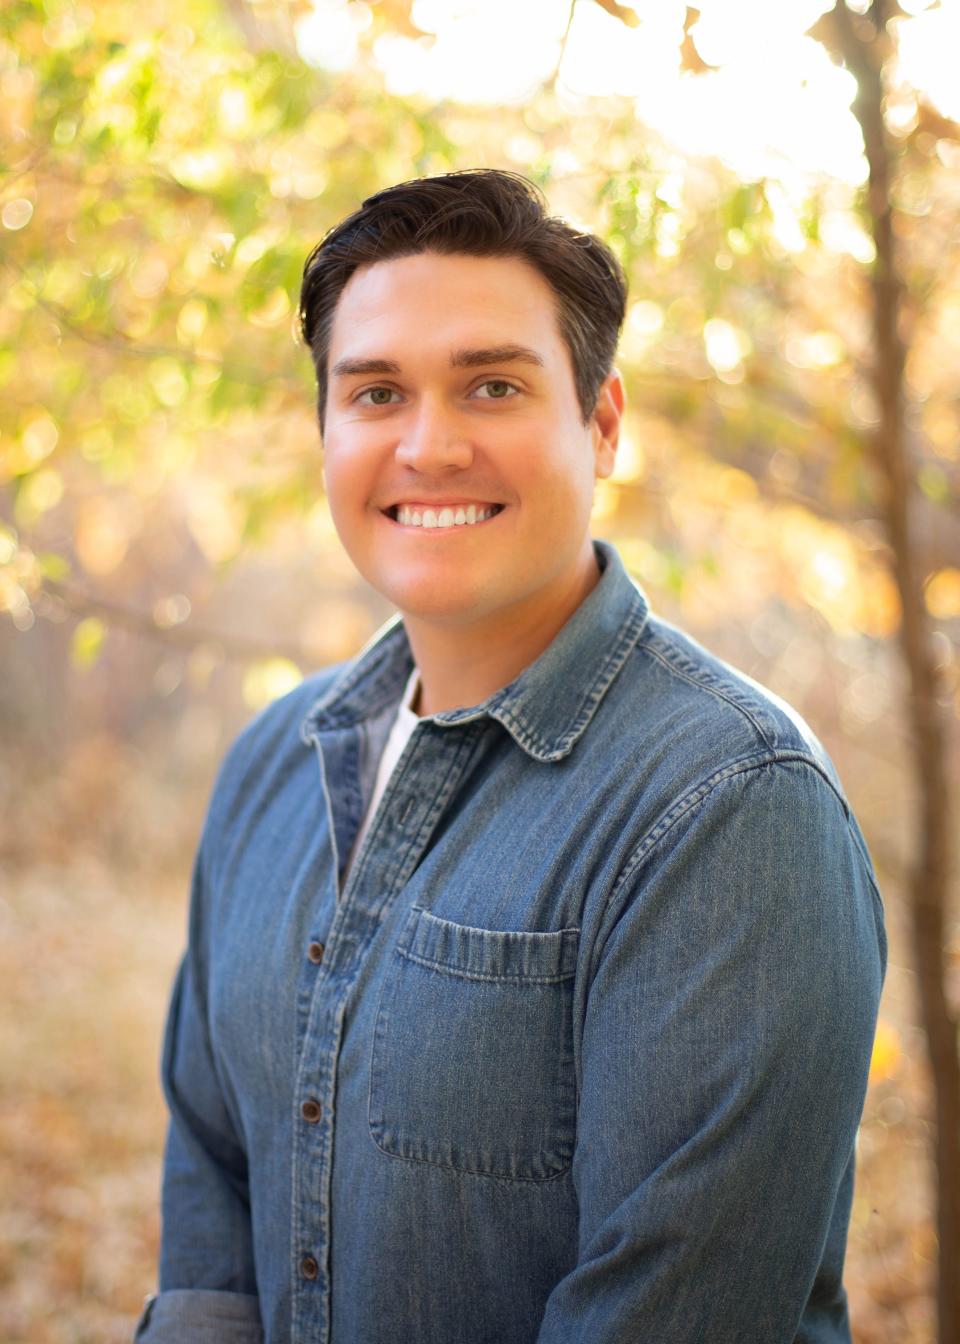 Miles Lucero is running for Pueblo County Commissioner in District 1.